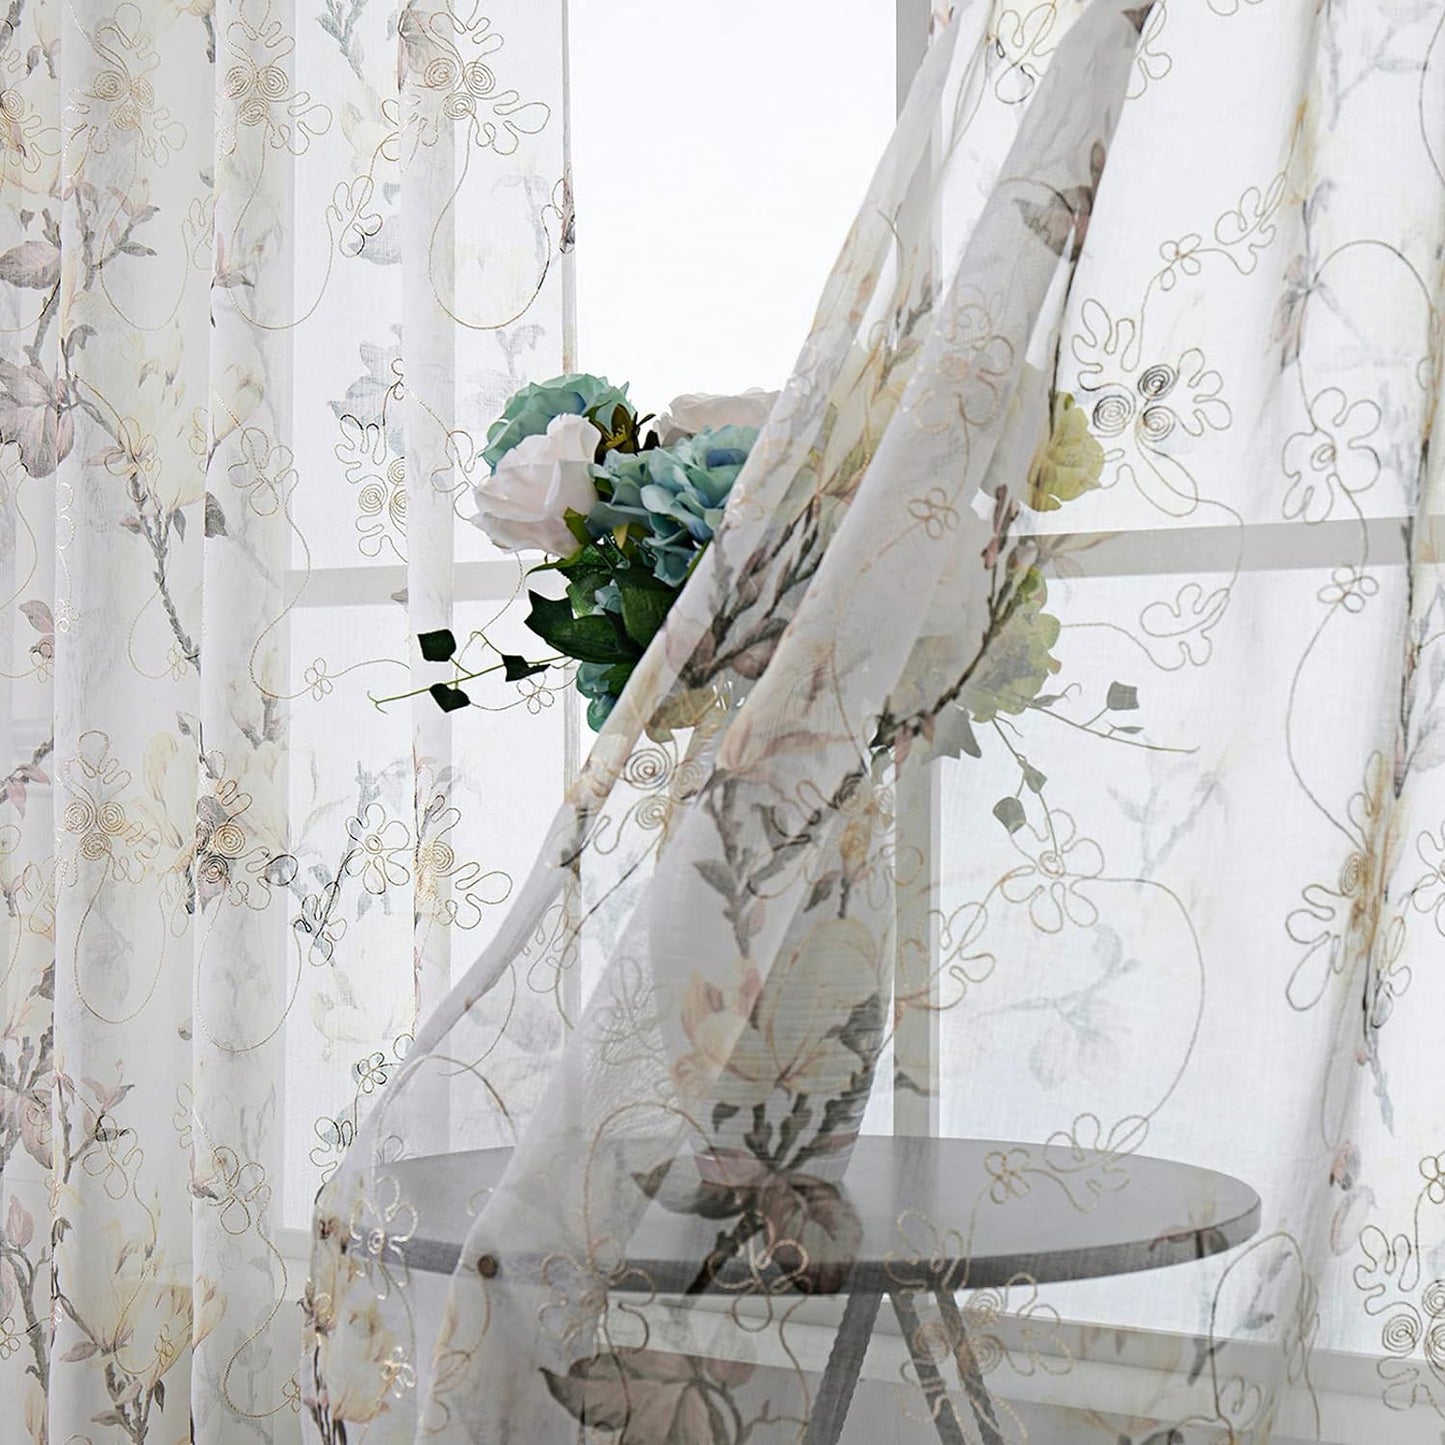 Tollpiz Floral White Sheer Curtain Flower Print Vine Embroidery Bedroom Curtains Rod Pocket Voile Window Curtain for Living Room, 54 X 84 Inches Long, Set of 2 Panels  Tollpiz Tex   